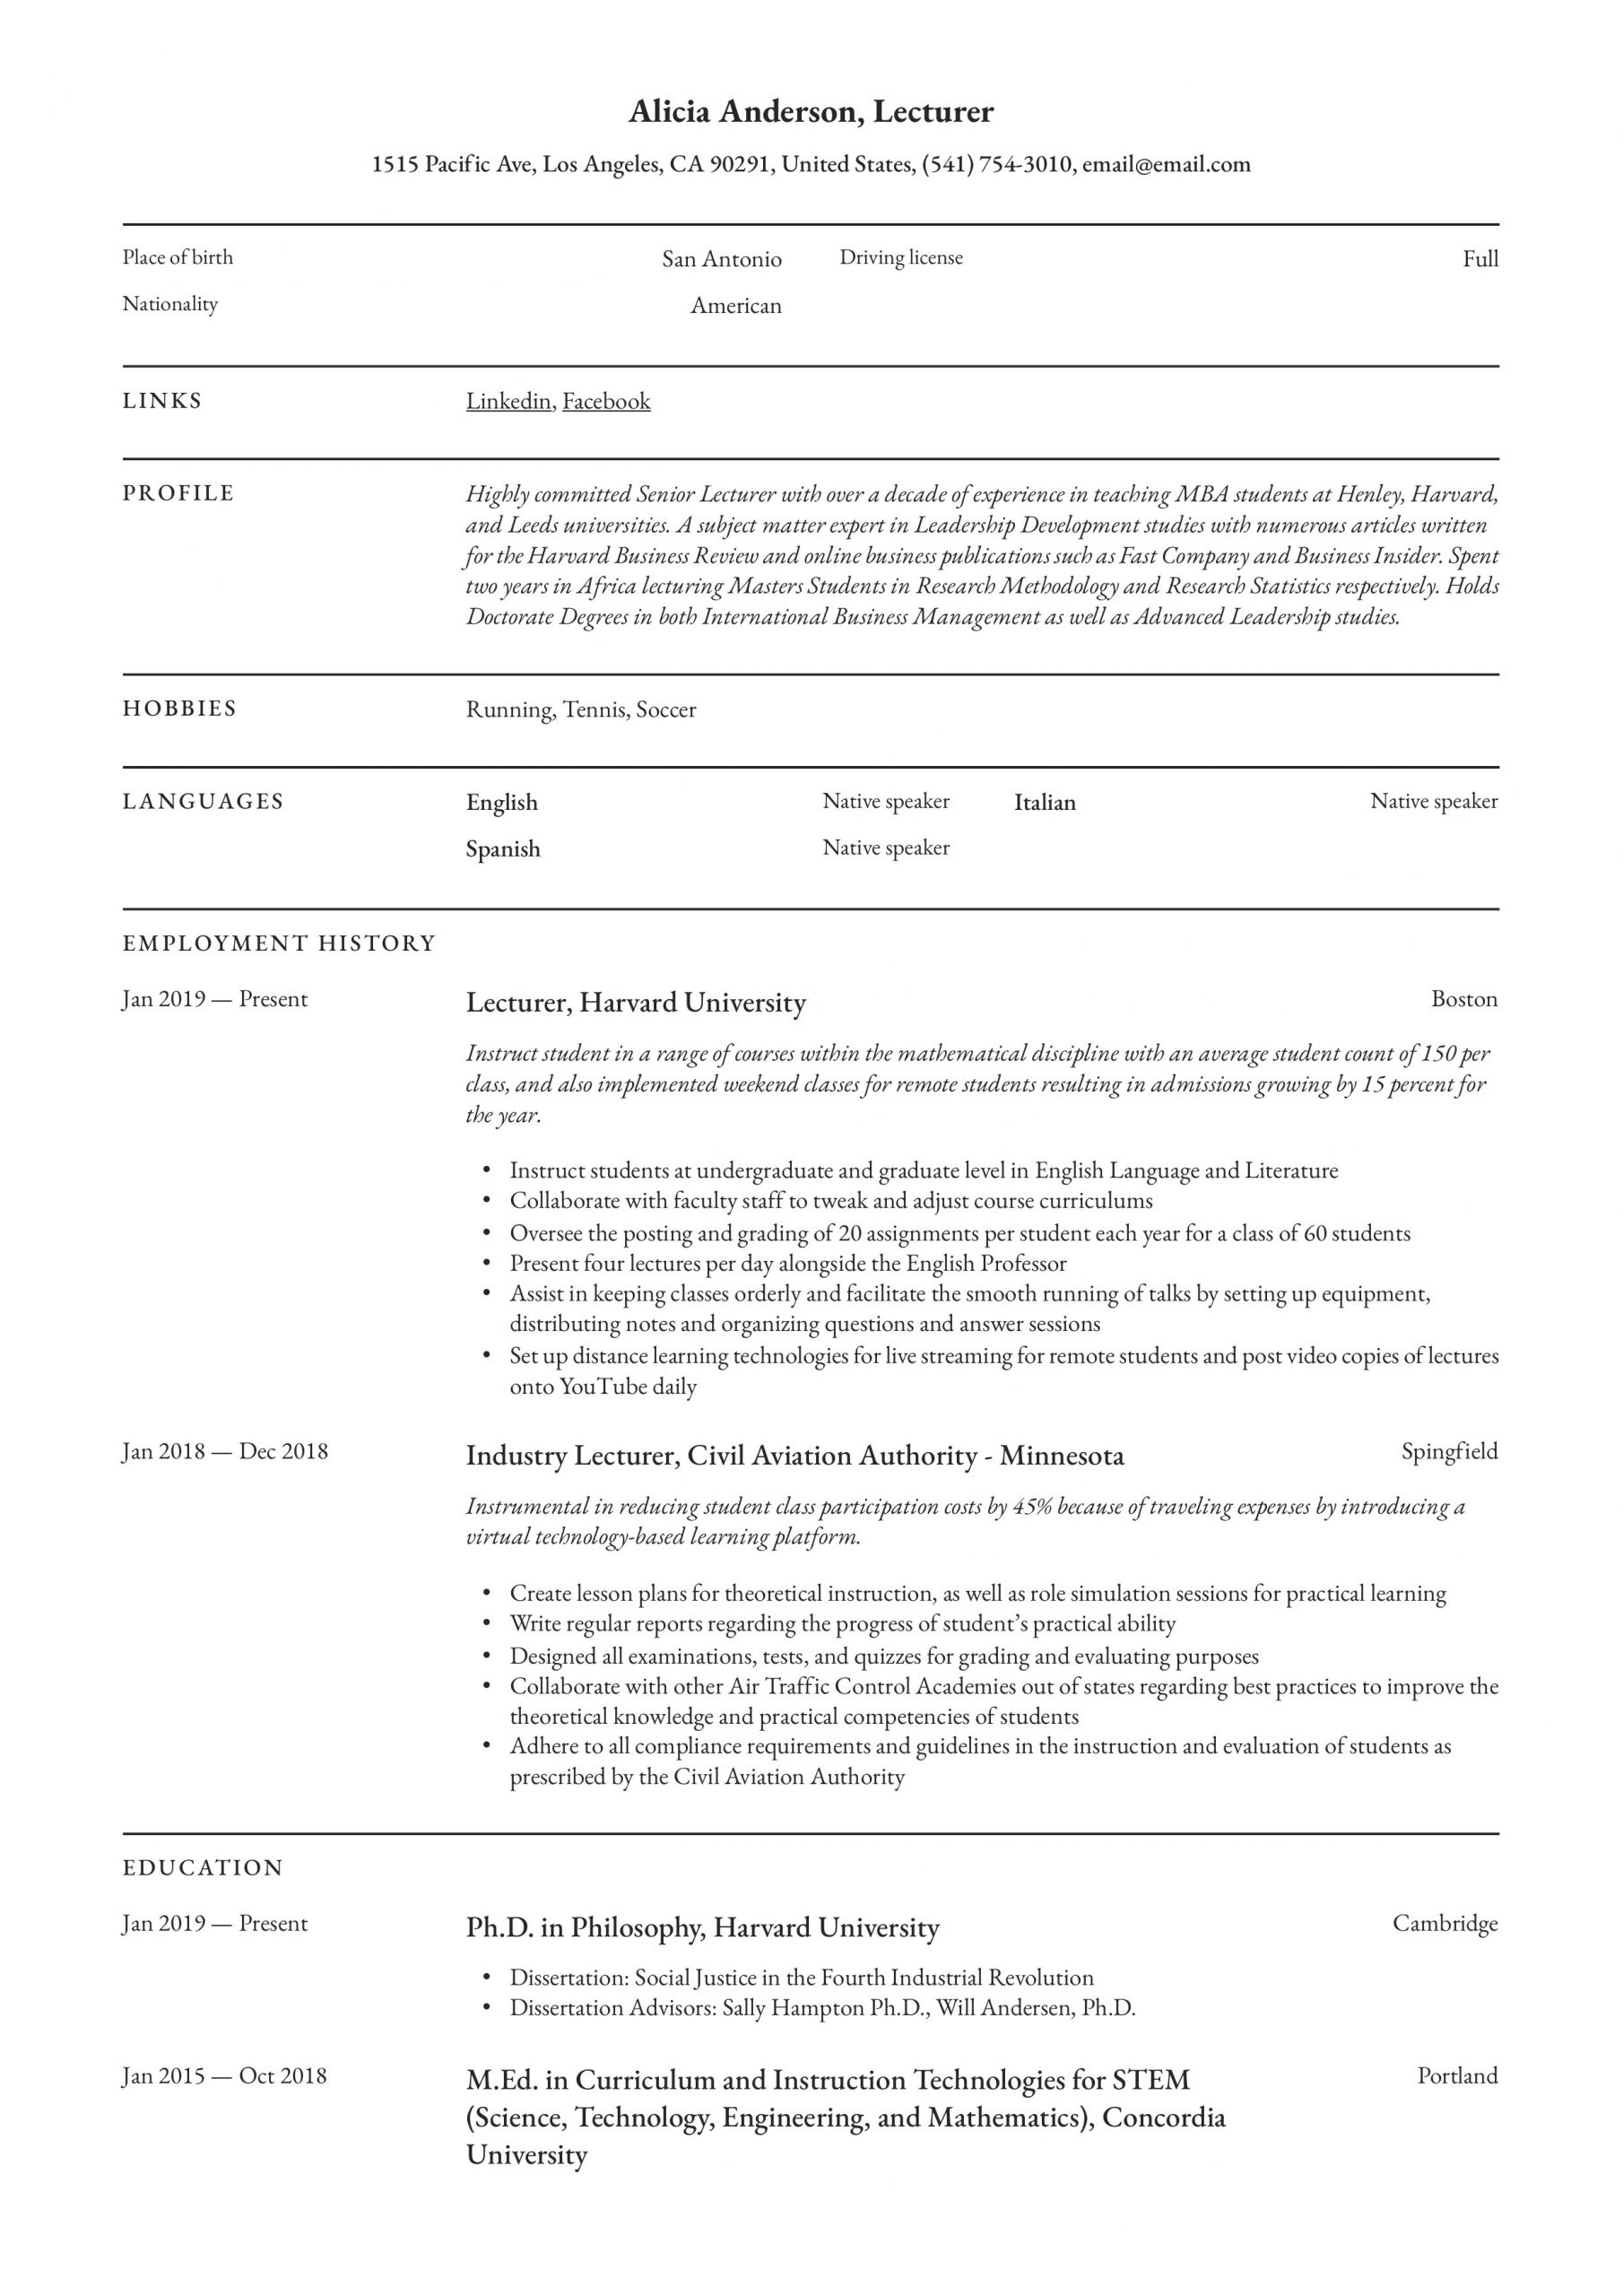 Sample Resume for Faculty Position In Engineering College Sample Cv for Lecturer Position In University Pdf Cv